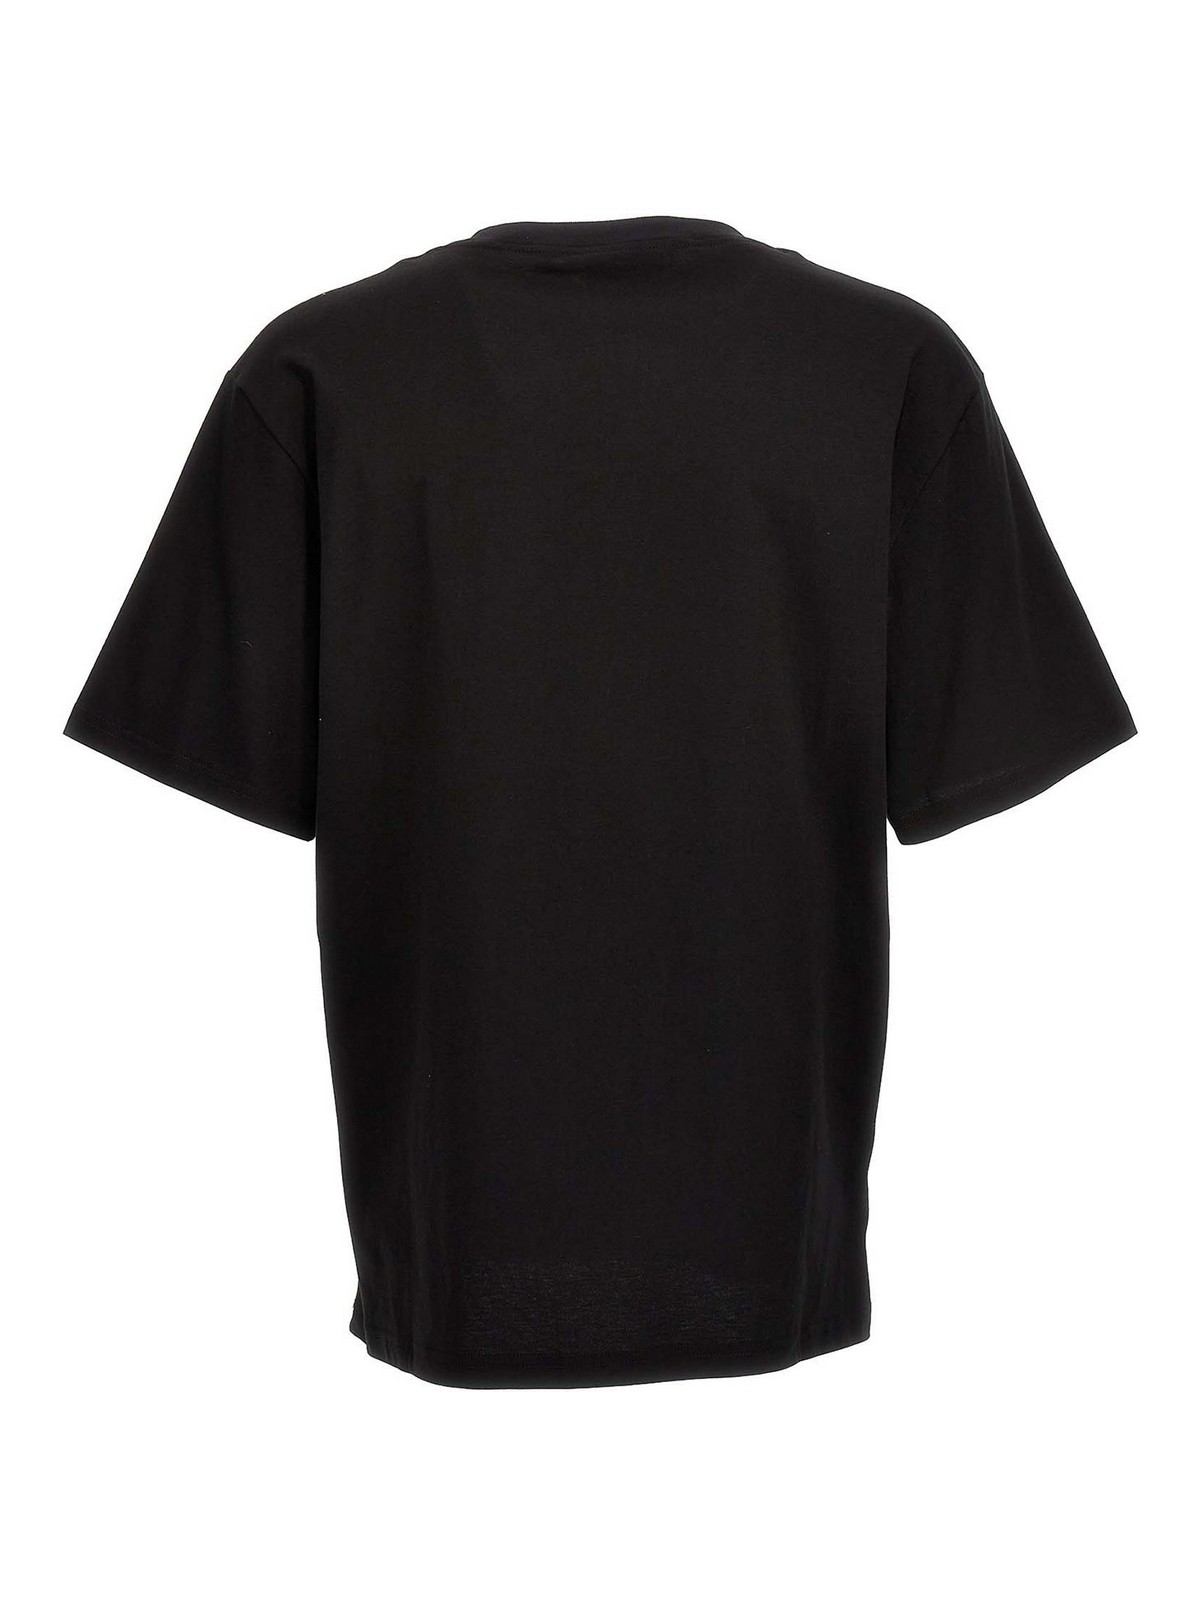 Shop Gcds Embroidery T-shirt In Black